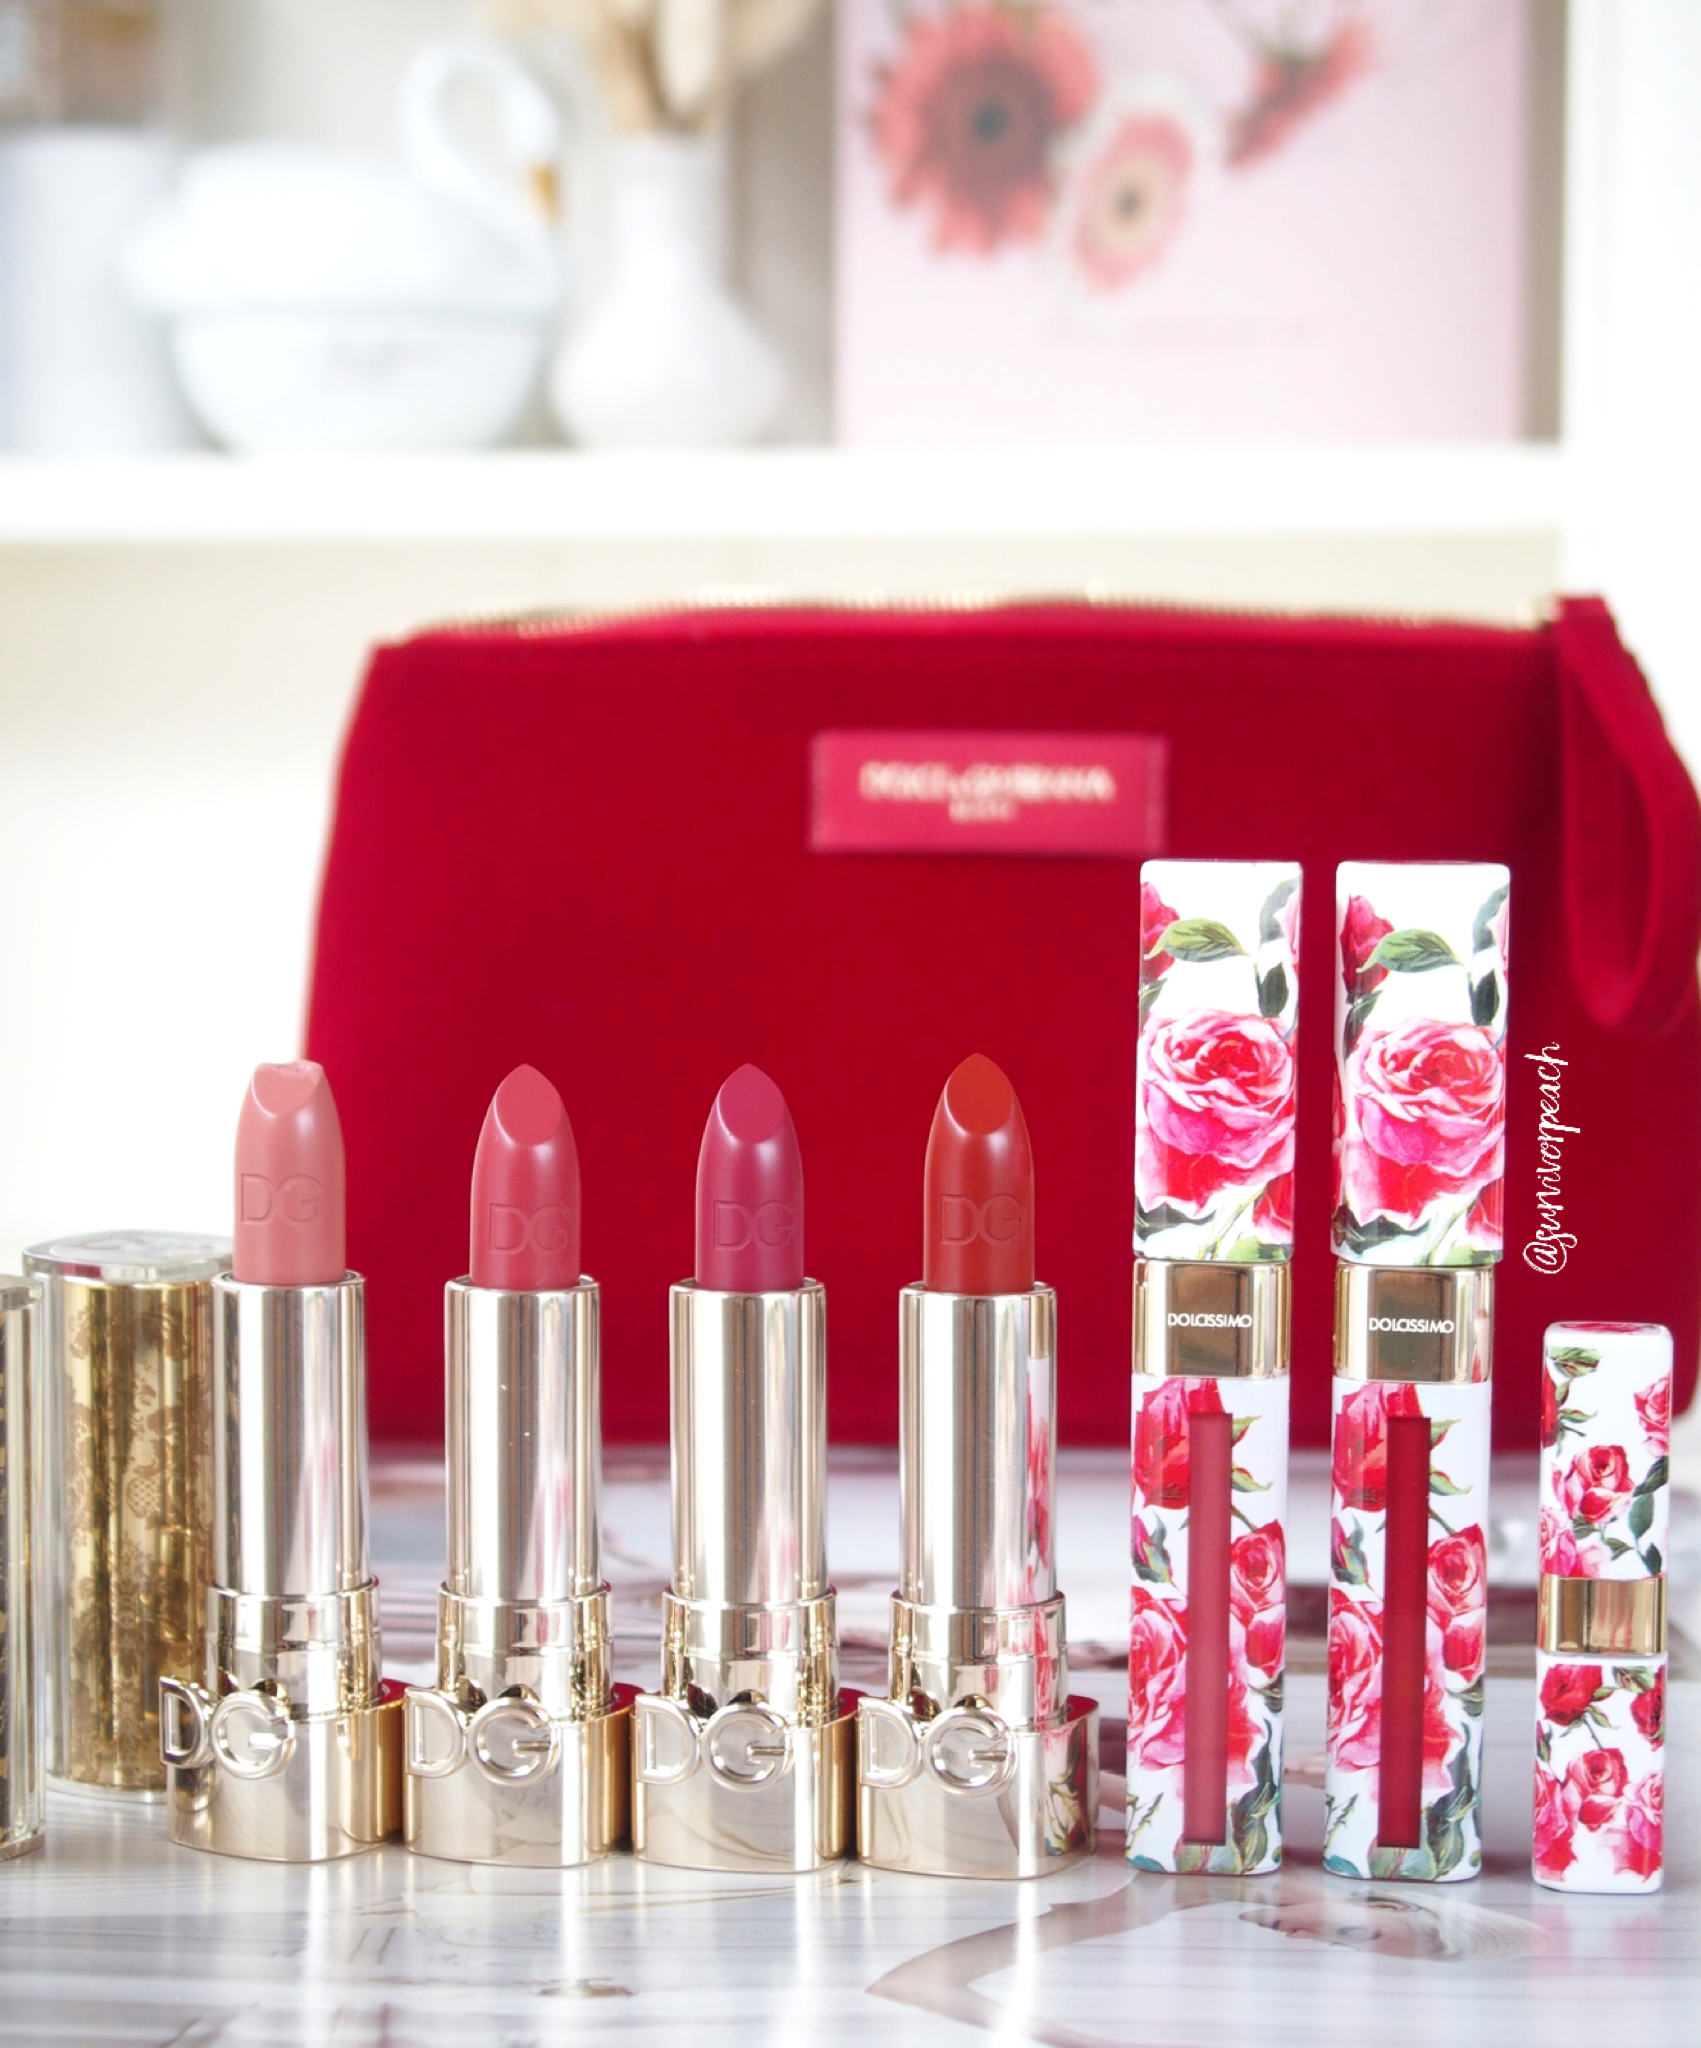 My Dolce gabbana Beauty Collection Part 1: The Only One Lipstick & The